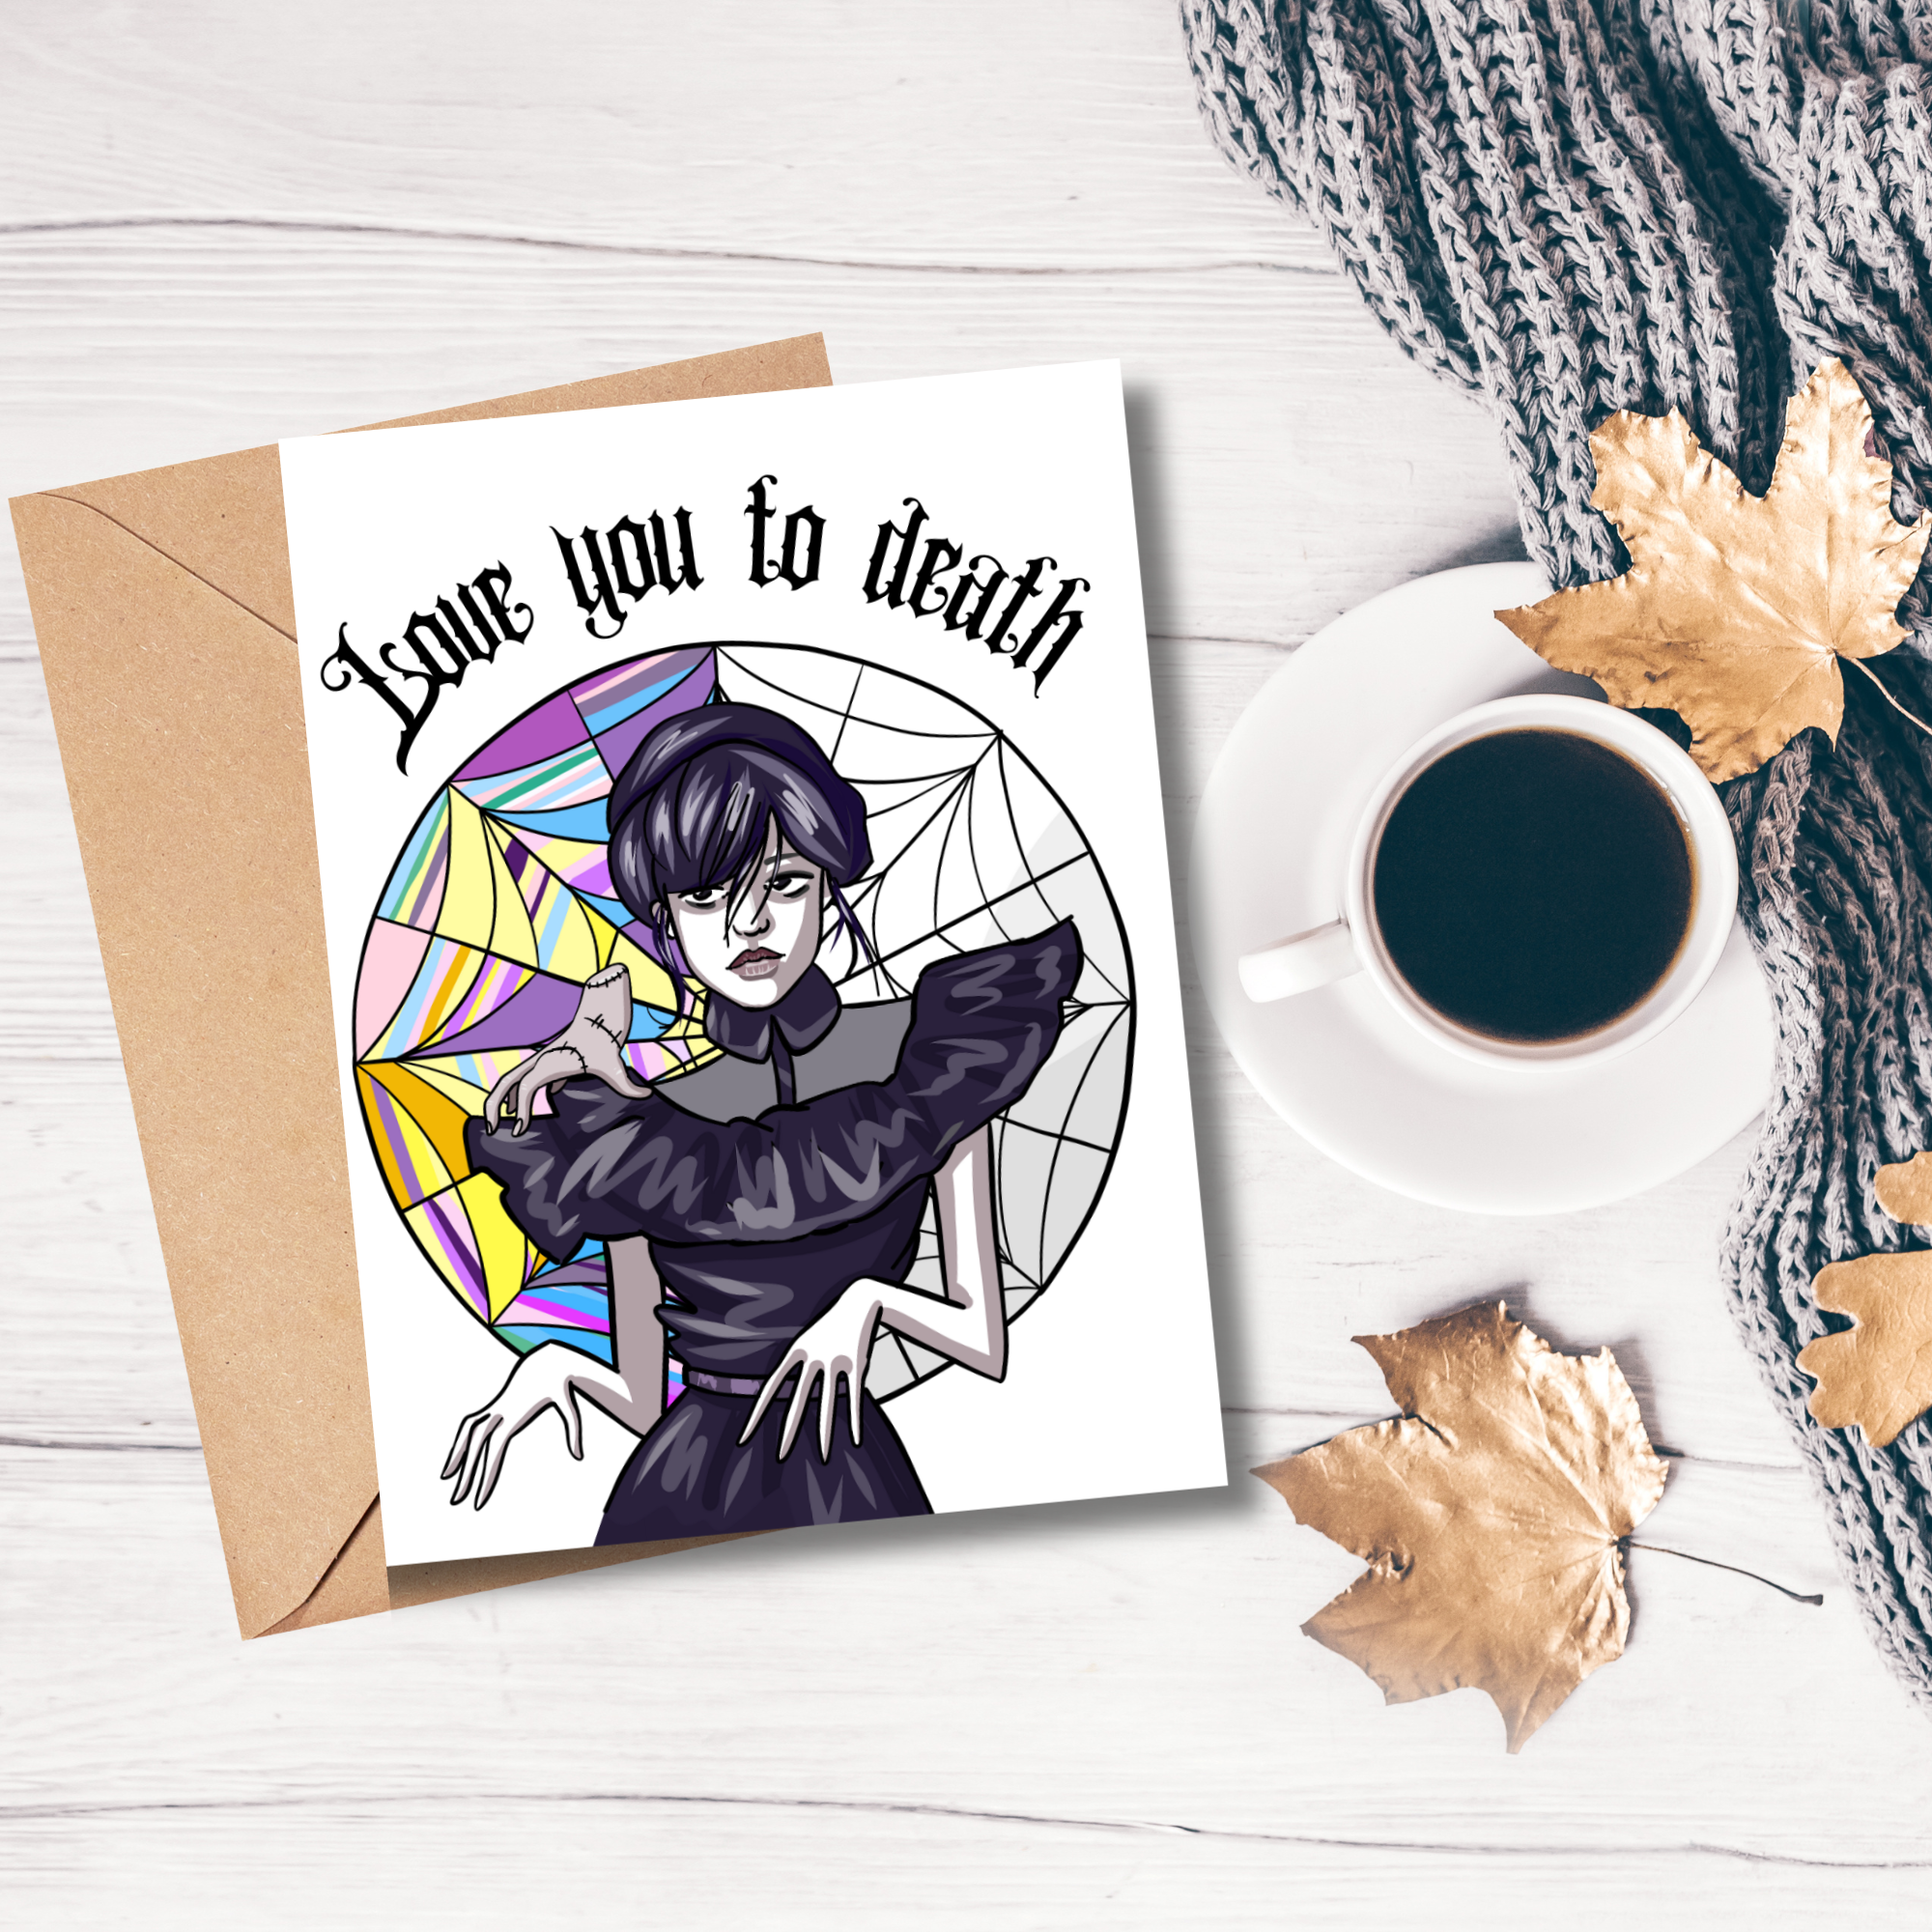 Love You to Death Wednesday Halloween Card